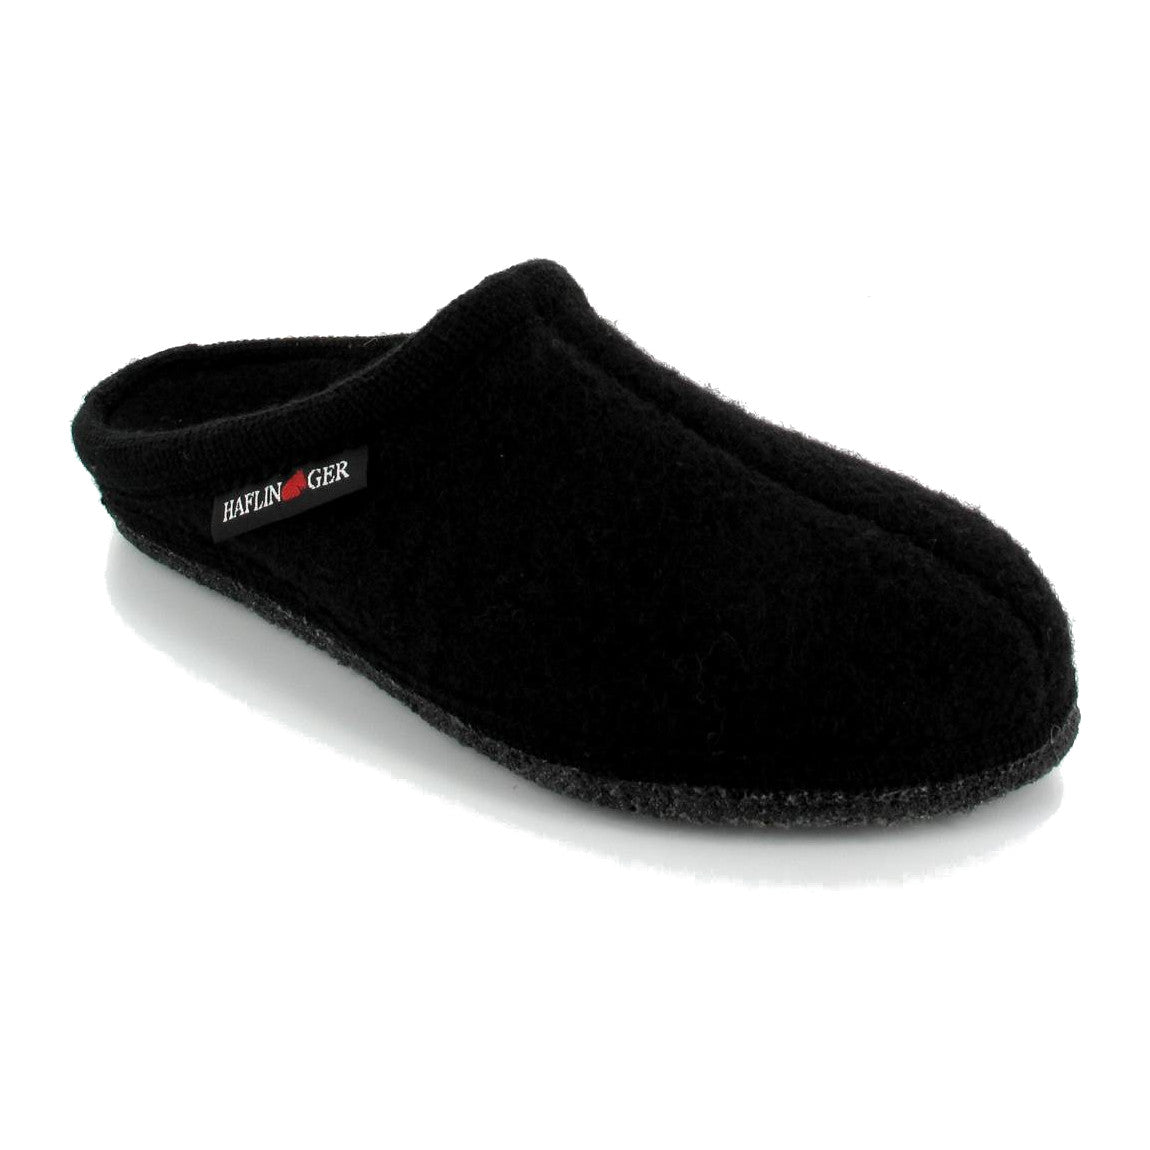 Haflinger Unisex AT (AT74) with Rubber Sole - Black